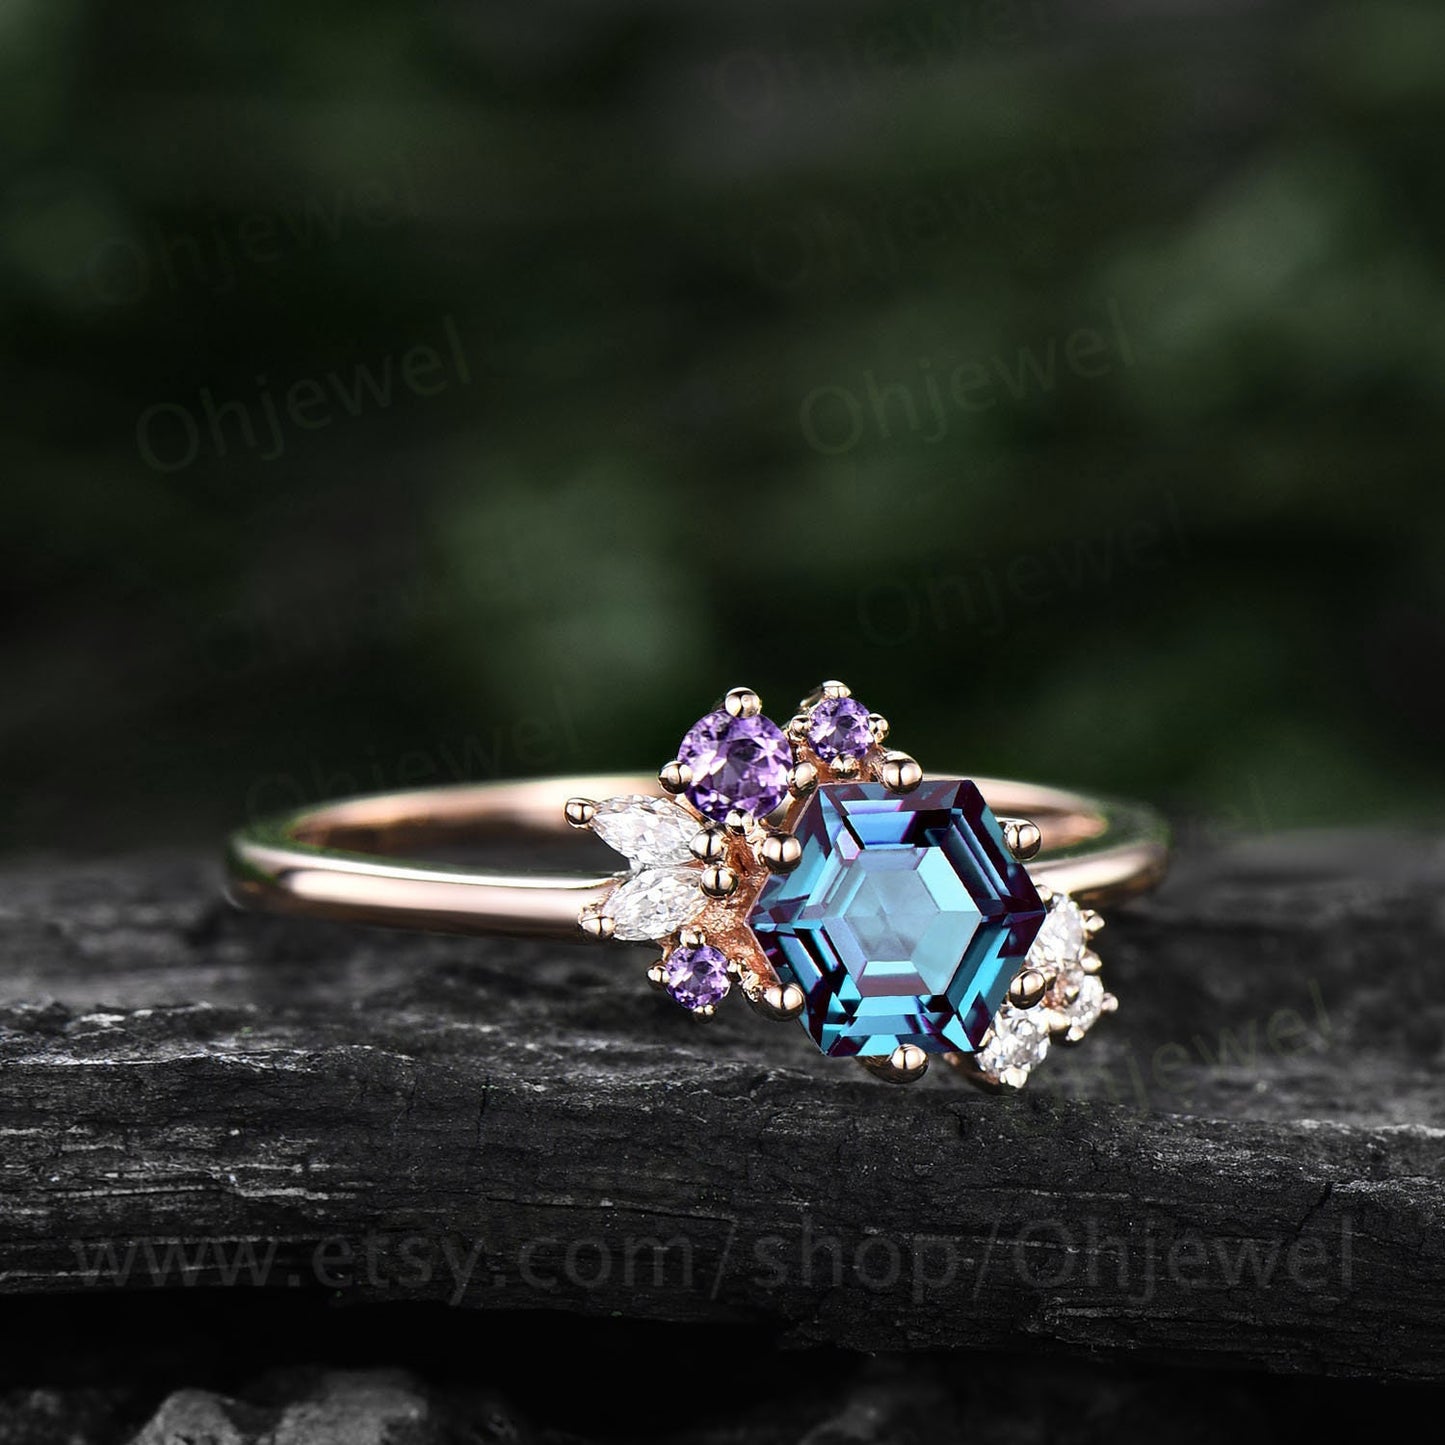 2ct Hexagon cut Alexandrite engagement ring 14k rose gold cluster diamond ring vintage amethyst ring women 6 prong unique wedding ring gifts